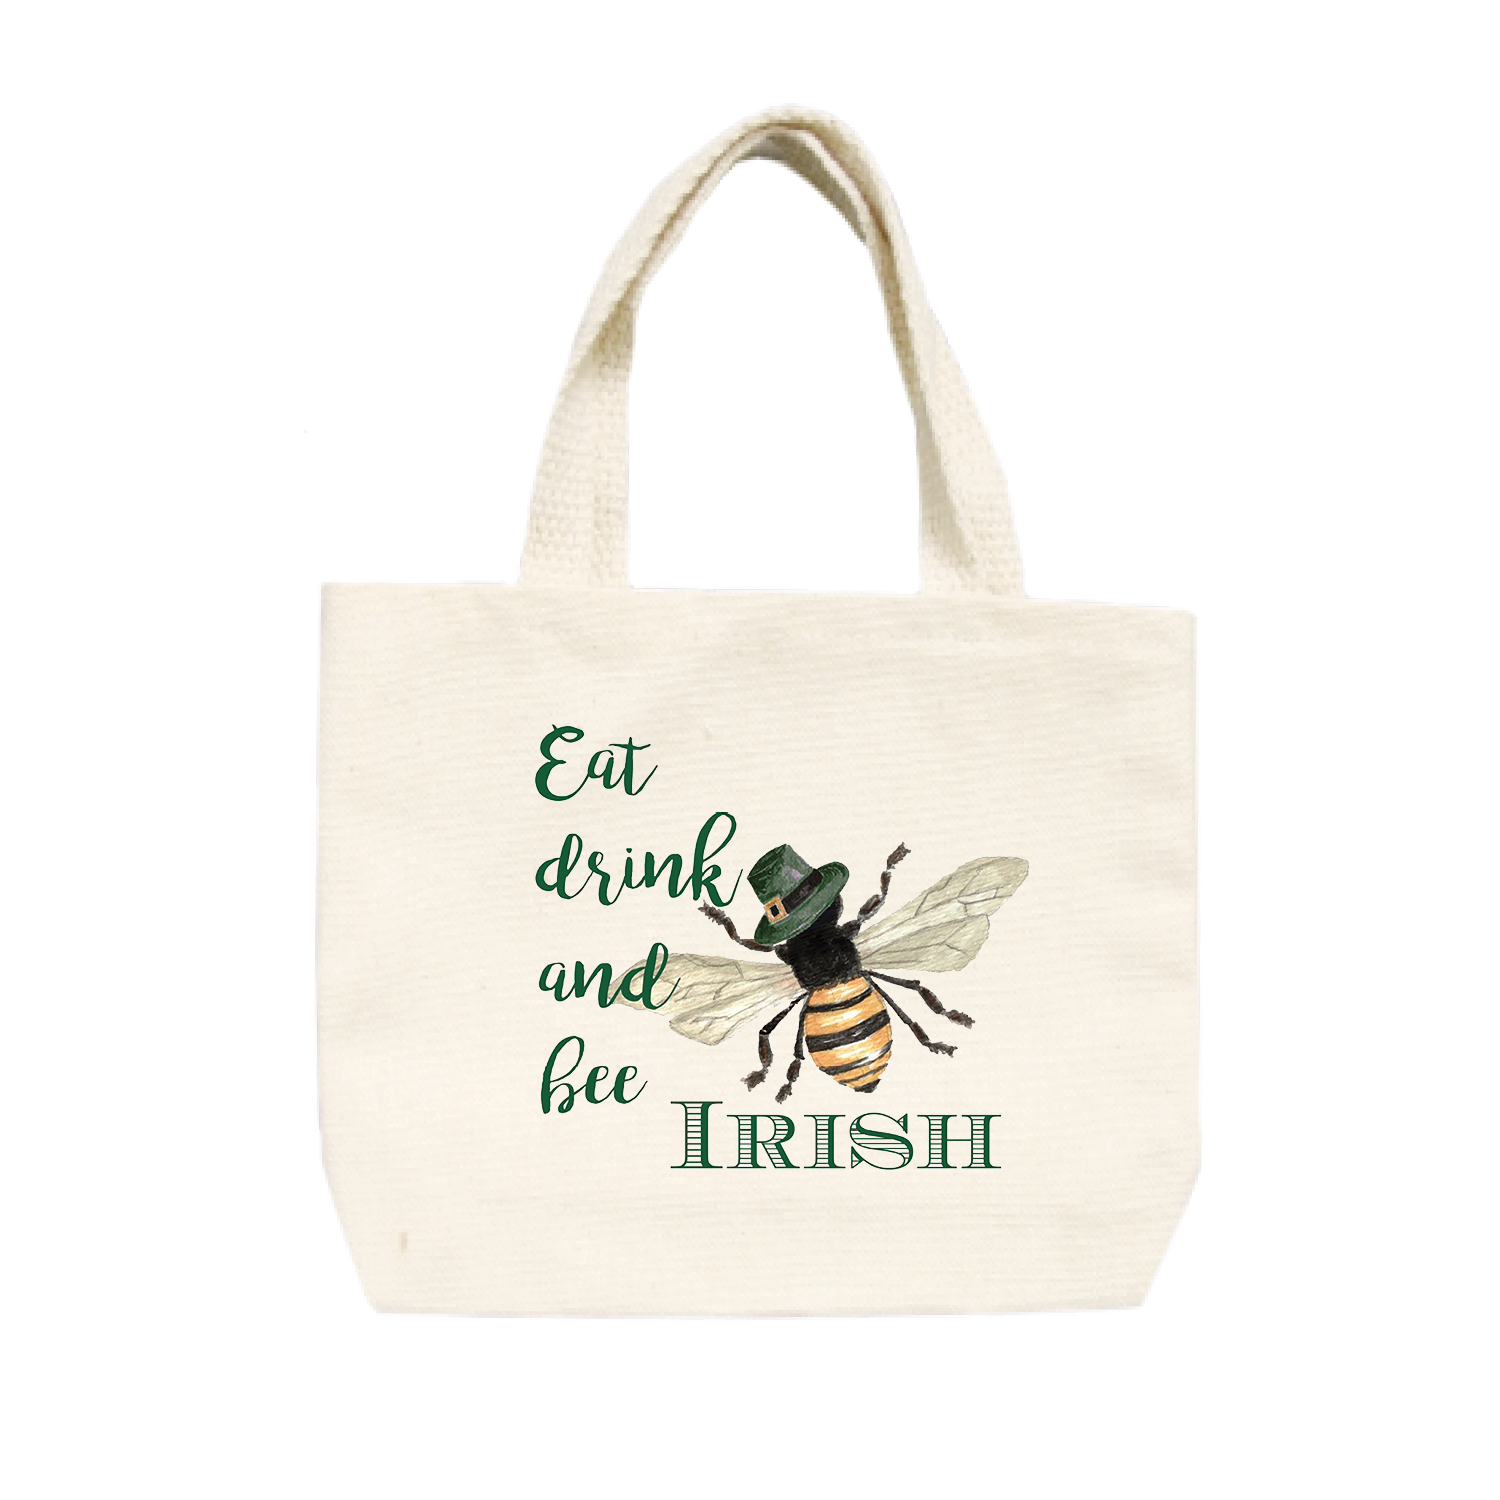 eat drink and bee irish small tote